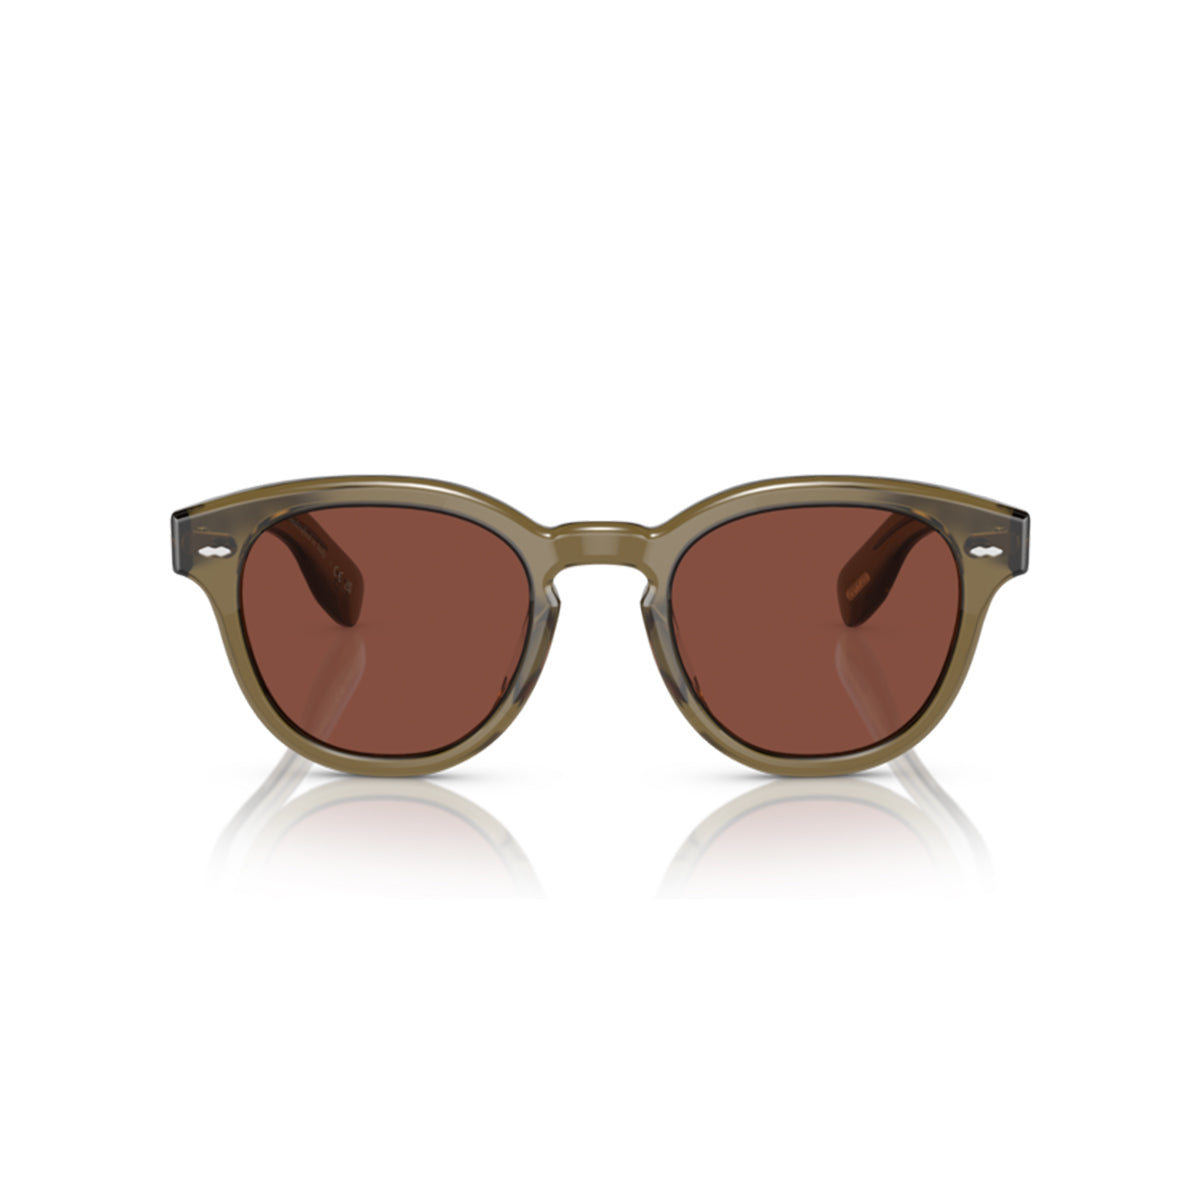 OLIVER PEOPLES CARY GRANT SUN DUSTY OLIVE W/ ROSEWOOD